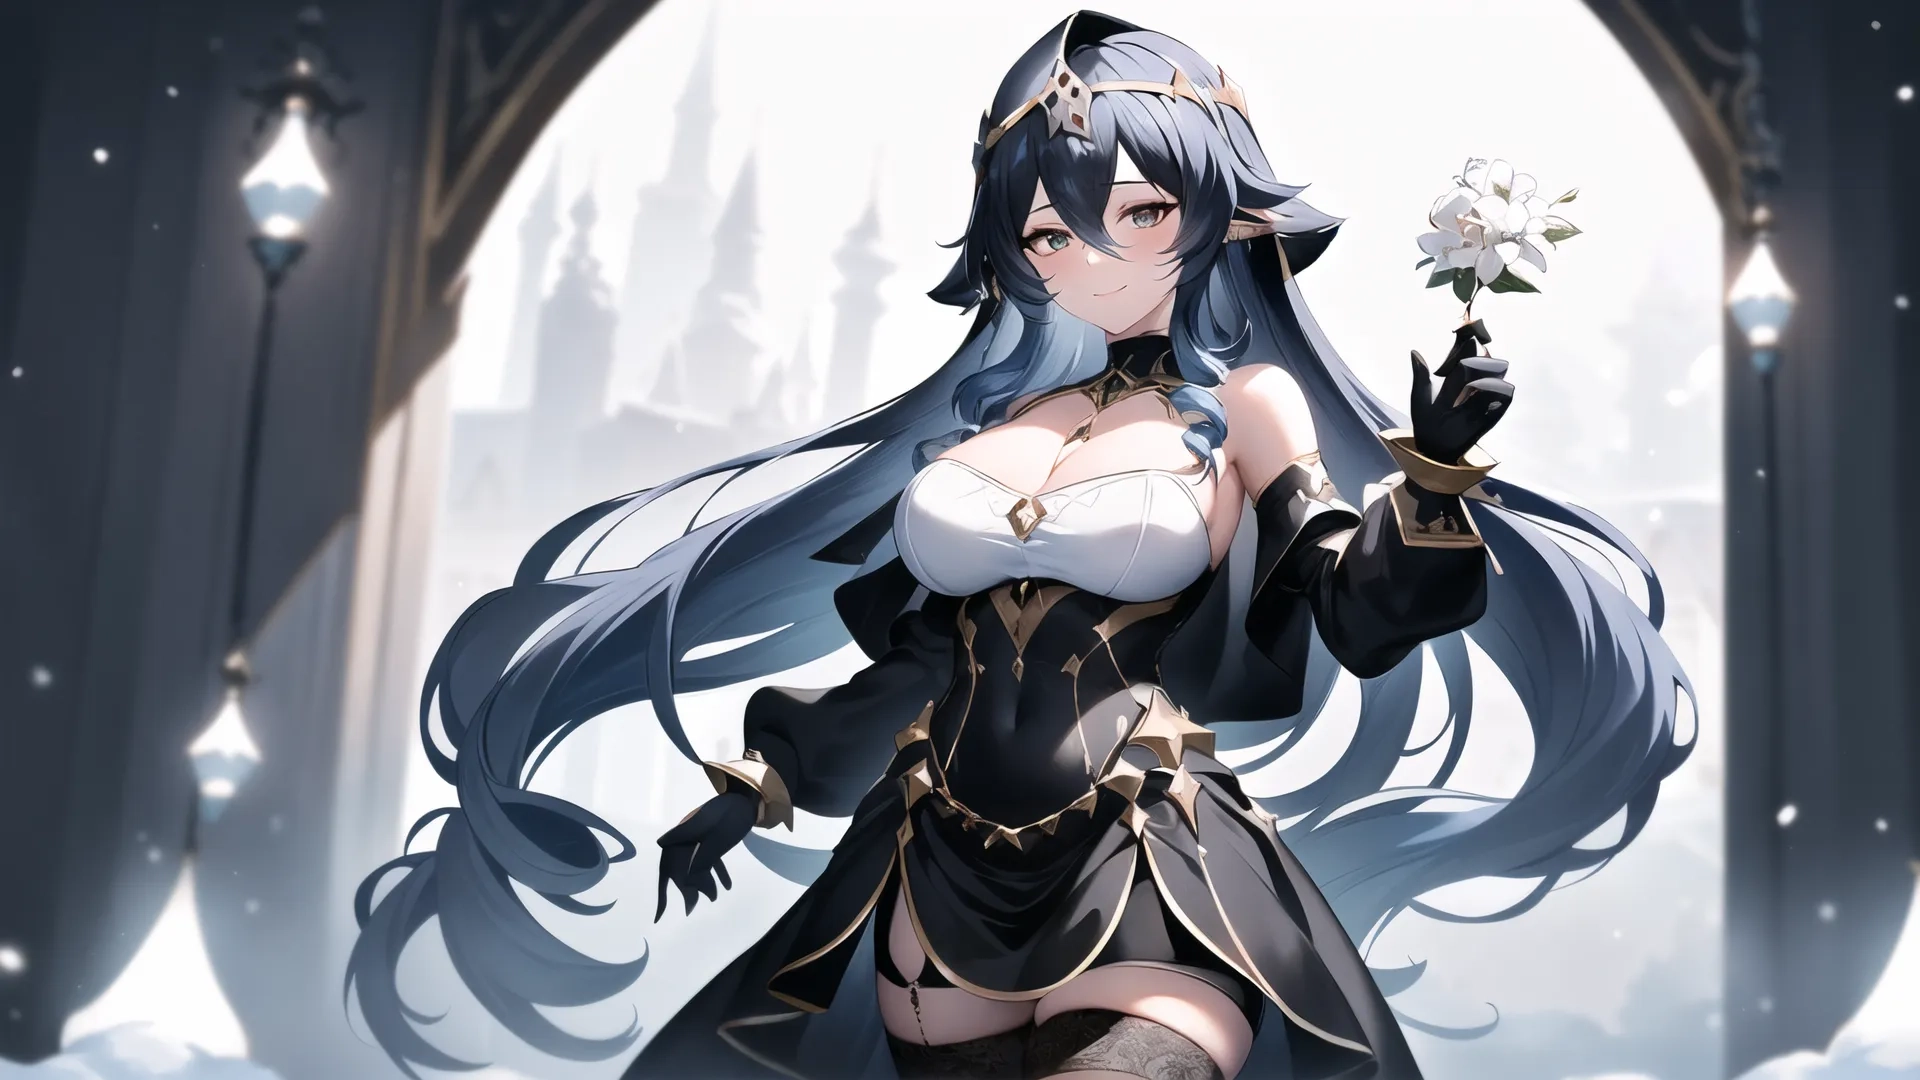 a cute girl is holding a flower wearing an elegant dress and gloves in the woods near the arch of an arch with a frozen landscape in the background
